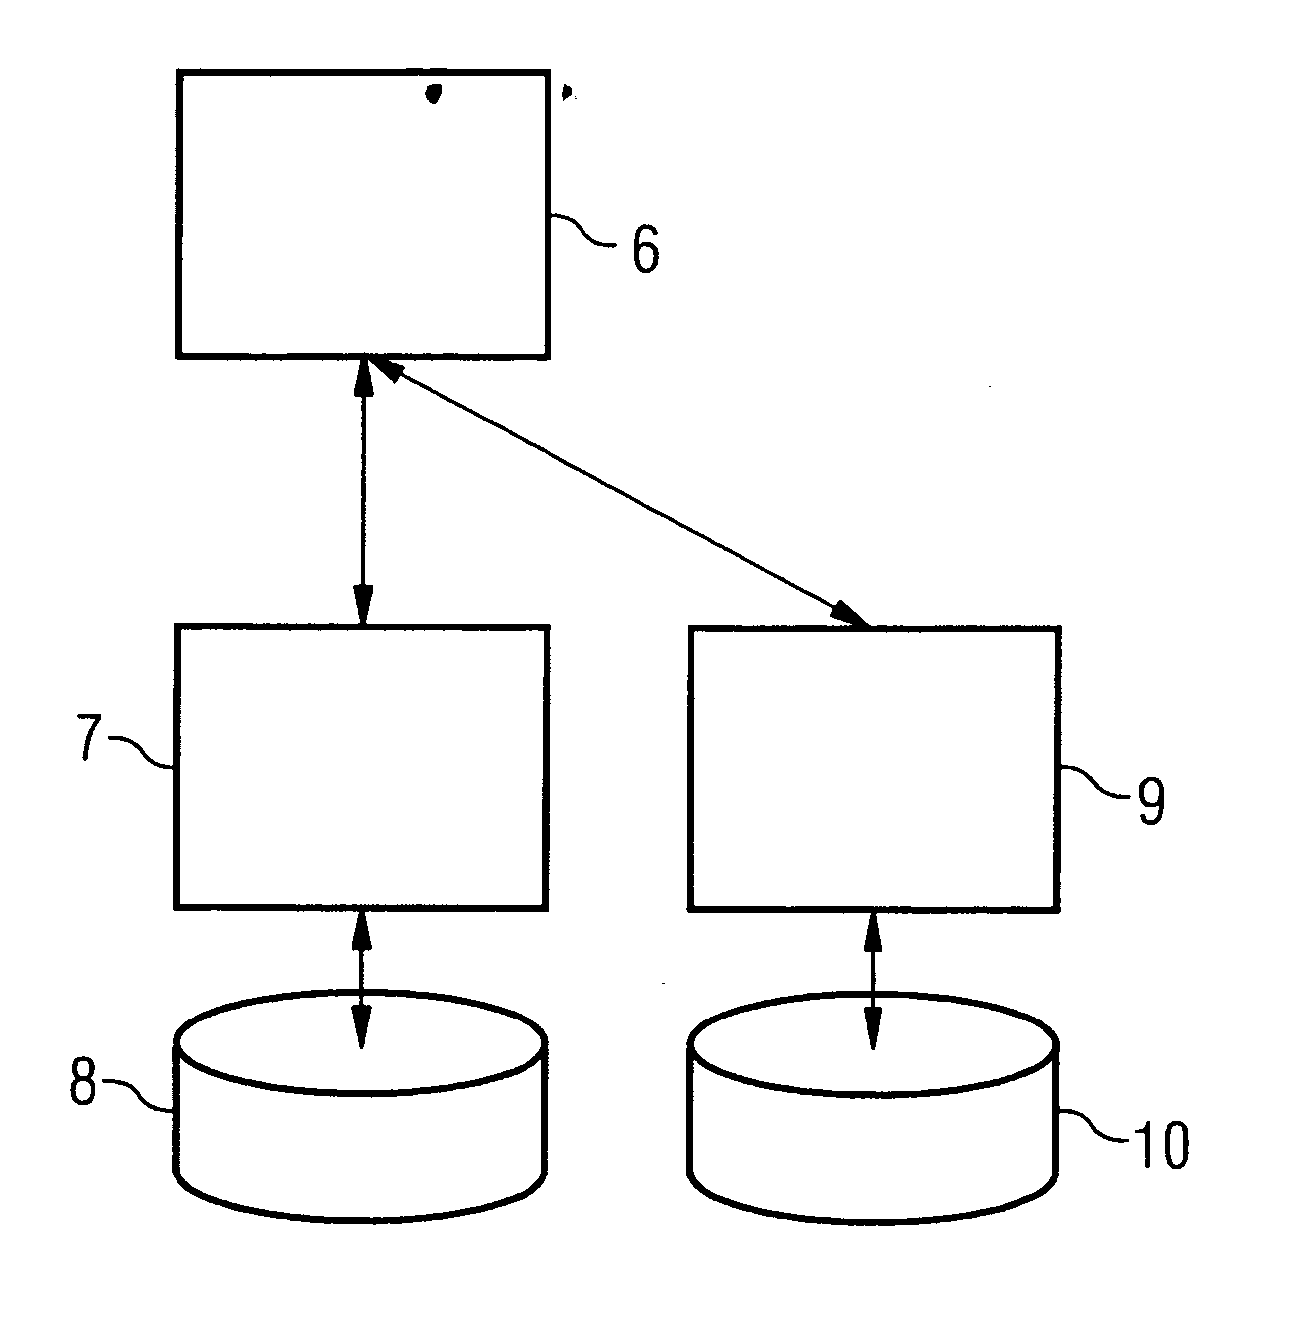 Data structure and method for creating and storing a file